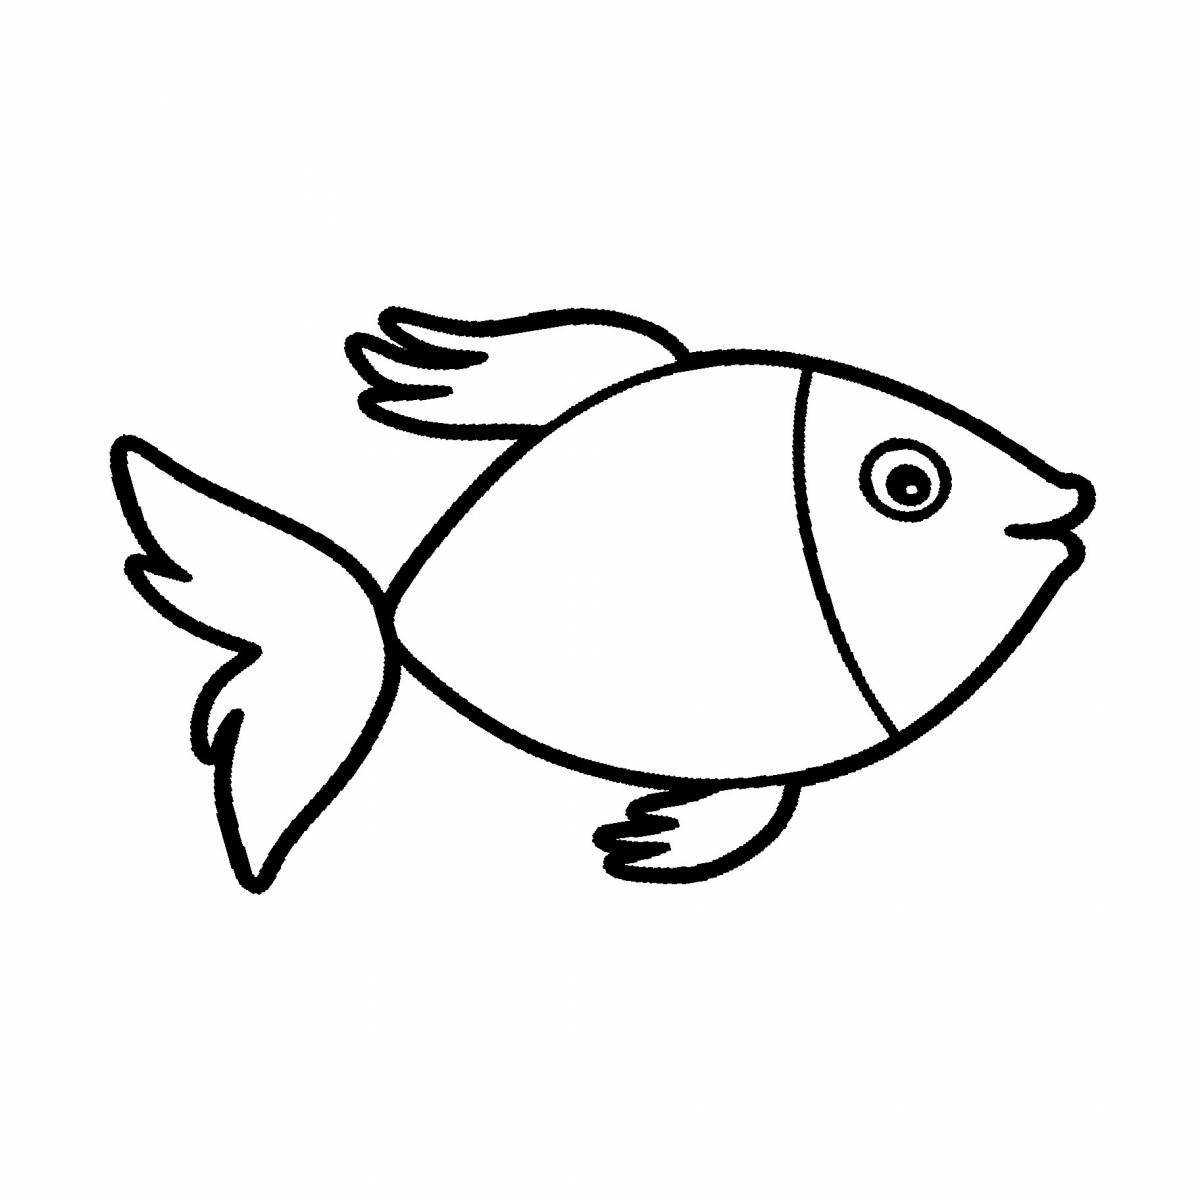 Exciting fish coloring book for children 2-3 years old